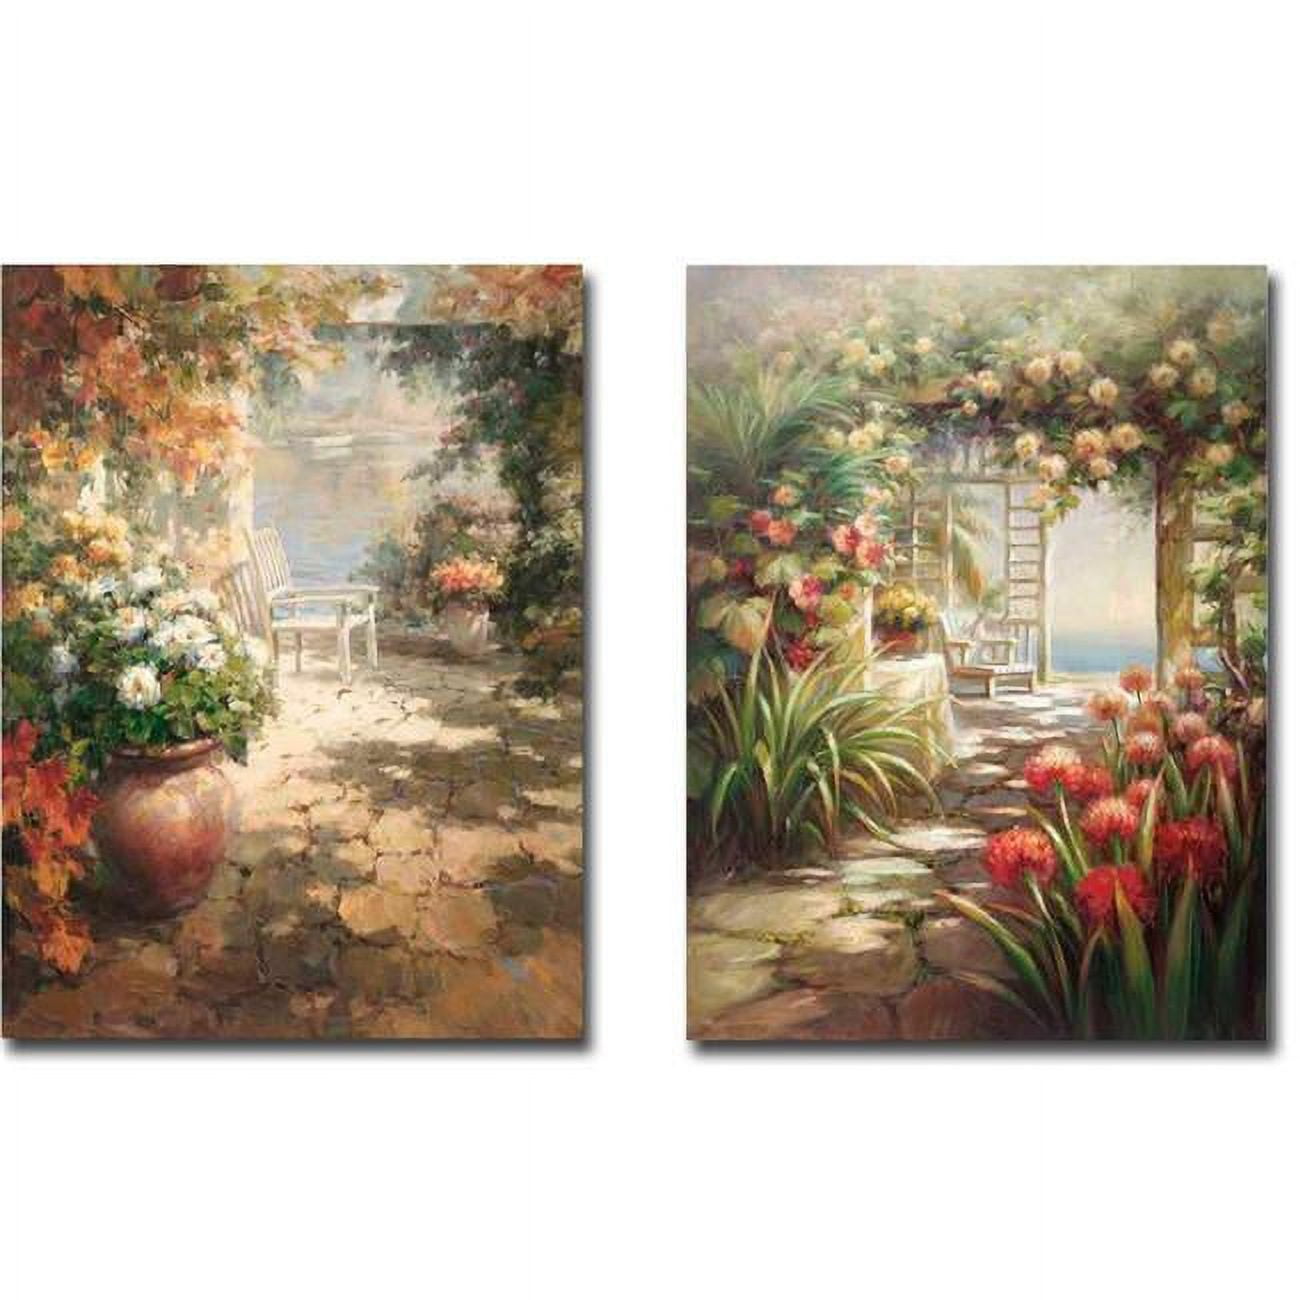 1218h435eg Cobblestone Cove I & Ii By Roberto Lombardi 2-piece Gallery-wrapped Canvas Giclee Art Set - 12 X 18 X 1.5 In.